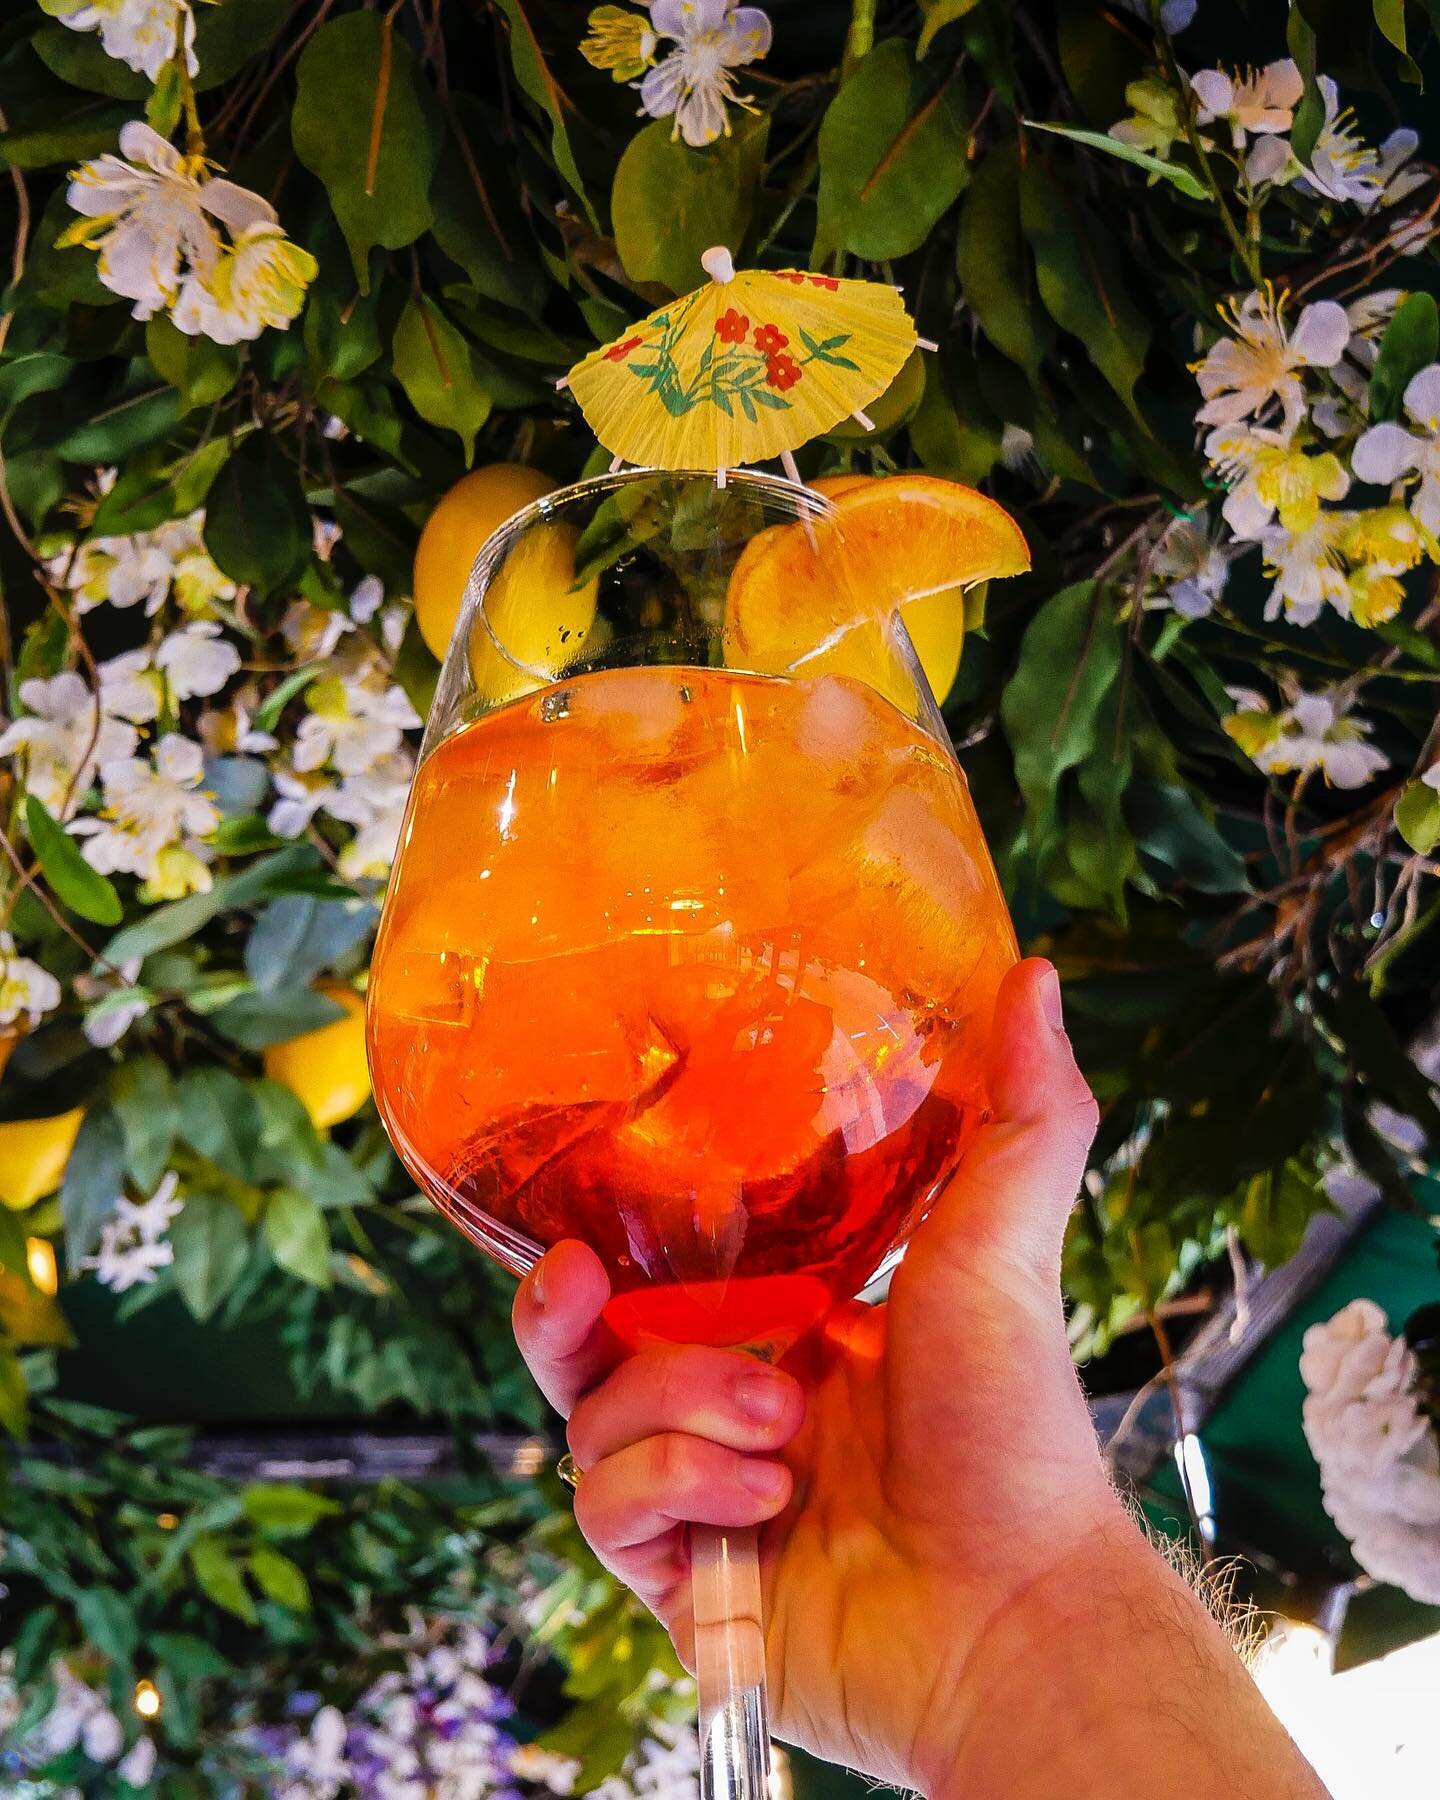 2 LITRES of APEROL SPRTIZ? Yes please ❤️🧡 grab a grande aperol spritz now available on our menu in a massive glass!
.
.
.
.
#eeeeeats #timeoutlondon #fooding #londonlife #londonfood #londonfoodie #londoneats #goingoutlondon #golondonfood #prettylitt